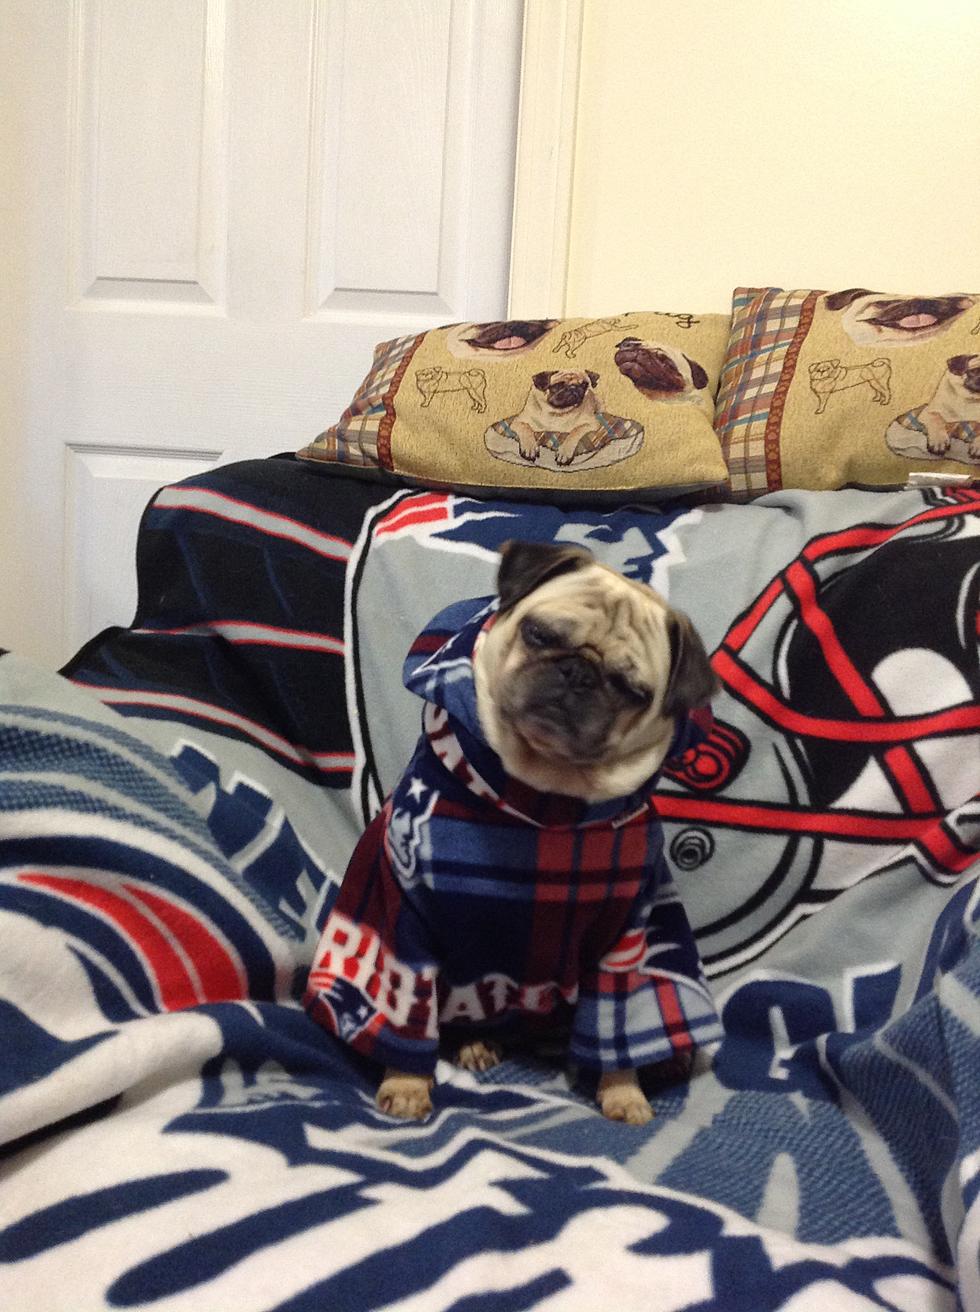 Pets Pride: Adorable Pug Rosie Is Decked Out in a Cozy New England Football Outfit